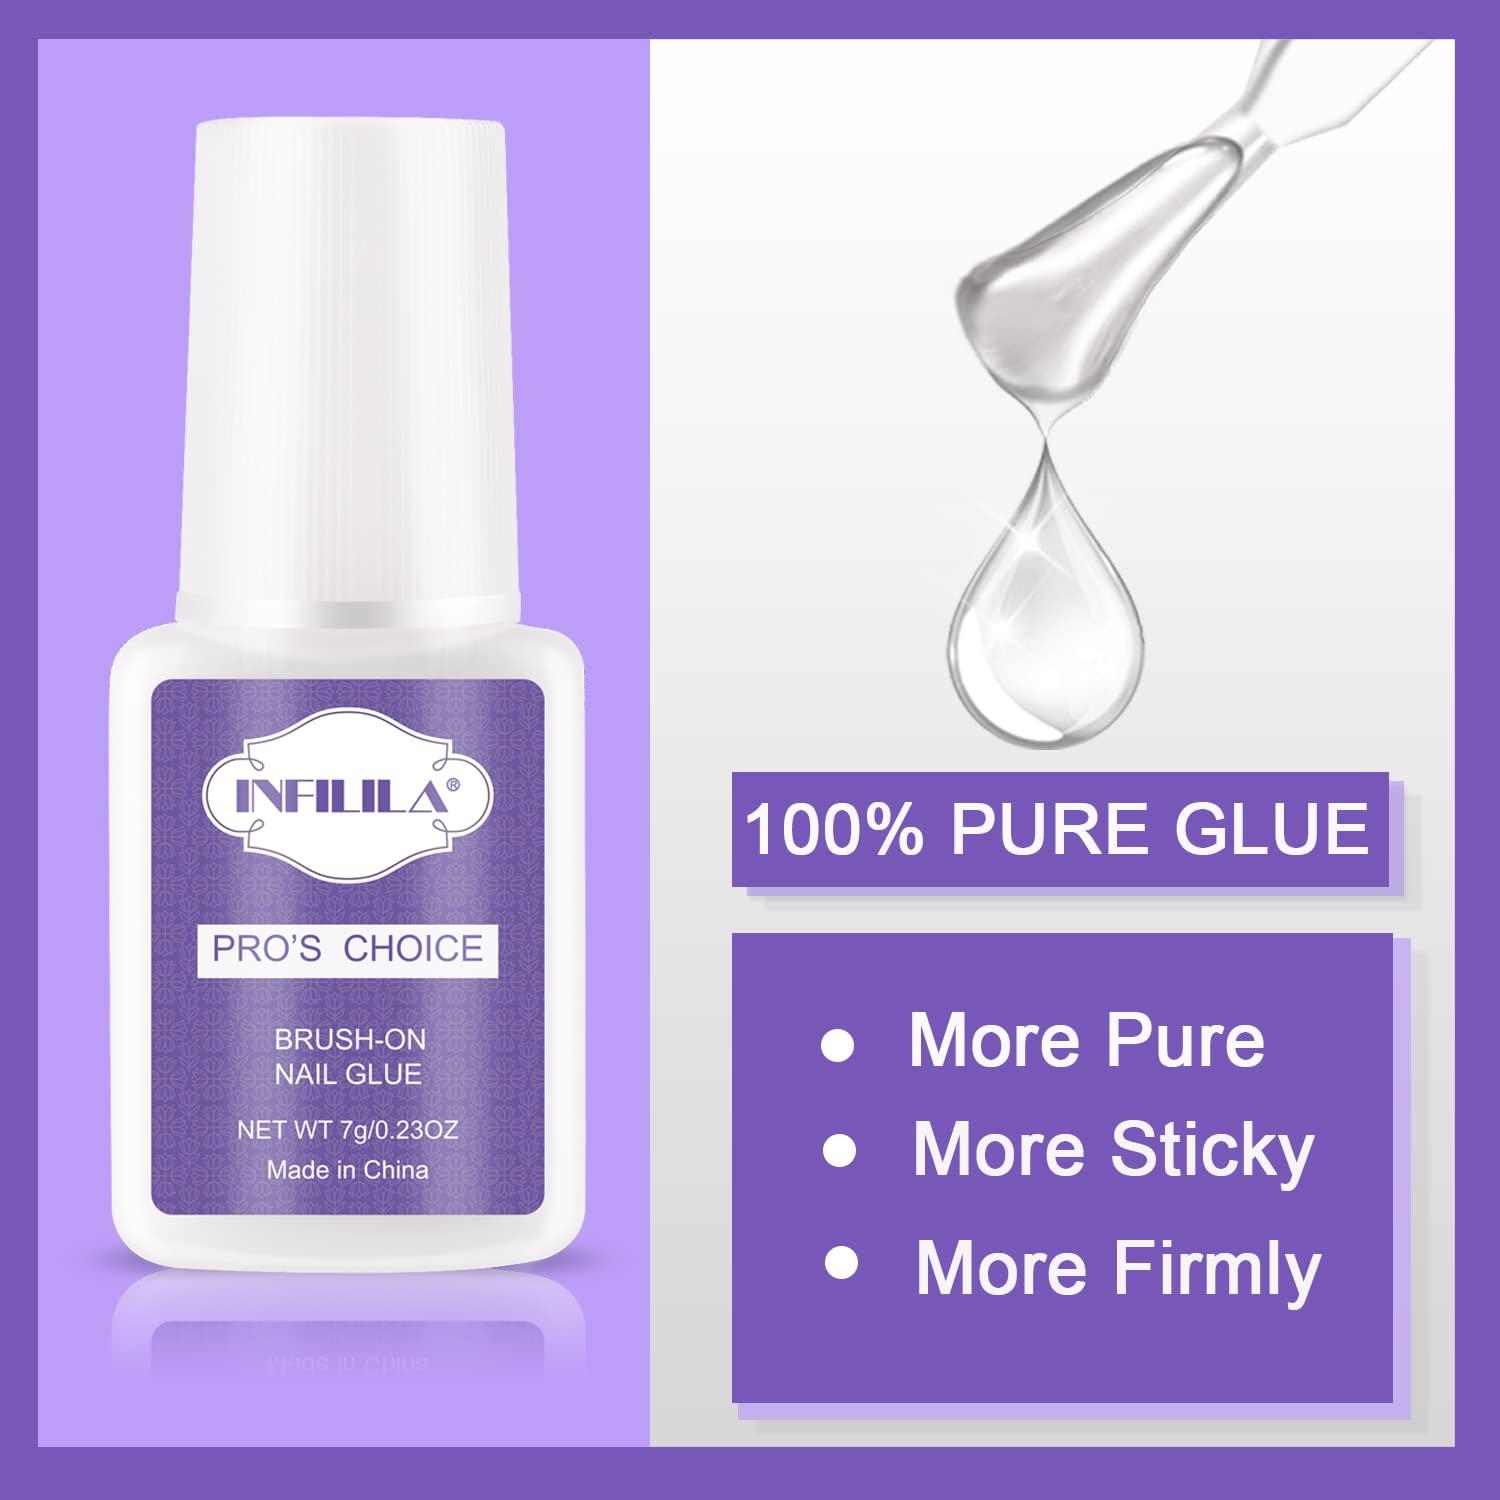 Nail Glue 💅♥️ 𝐄𝐱𝐜𝐥𝐮𝐬𝐢𝐯𝐞 𝐎𝐟𝐟𝐞𝐫𝐬: 𝐉𝐮𝐬𝐭 𝐑𝐬.𝟏𝟒𝟗! Get  best offers and deals at best prices Call us on +91 7718003906 Or Dm… |  Instagram